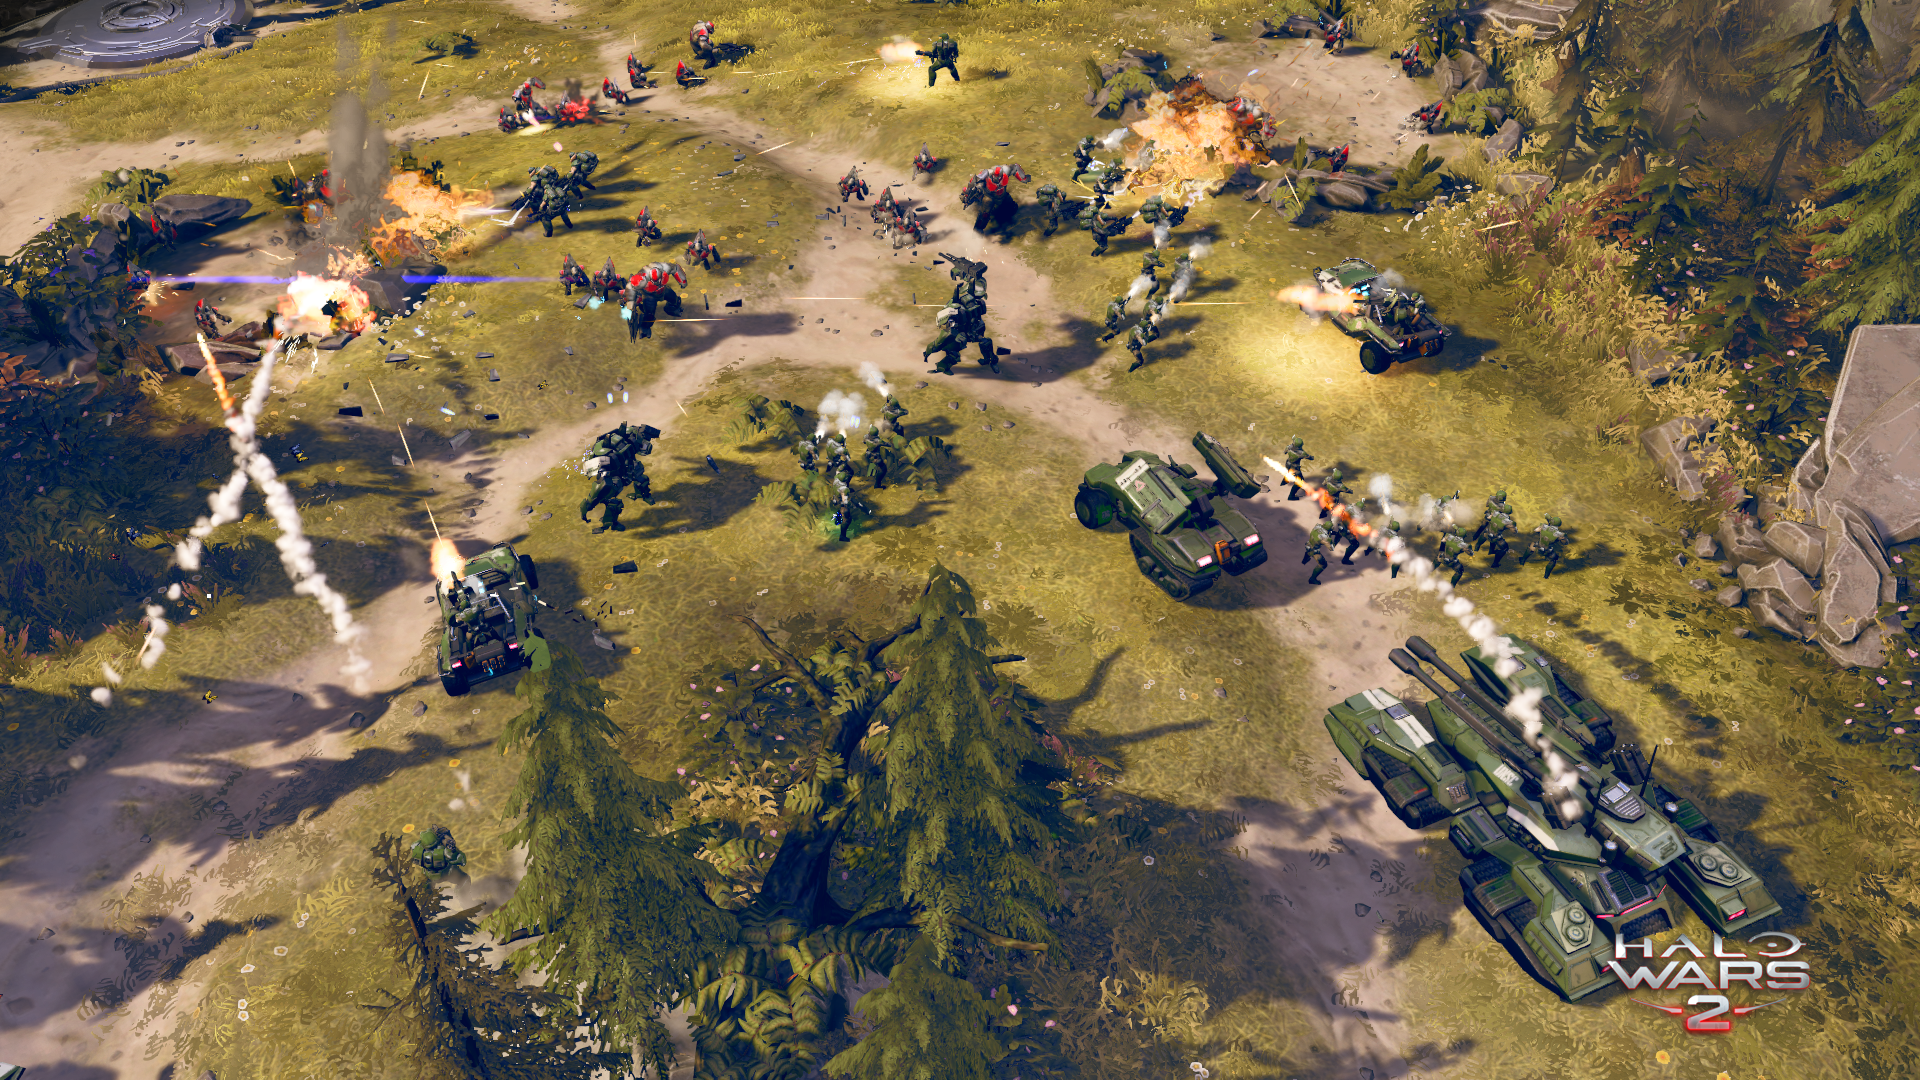 Halo Wars 2 Campaign Deadly Skirmish